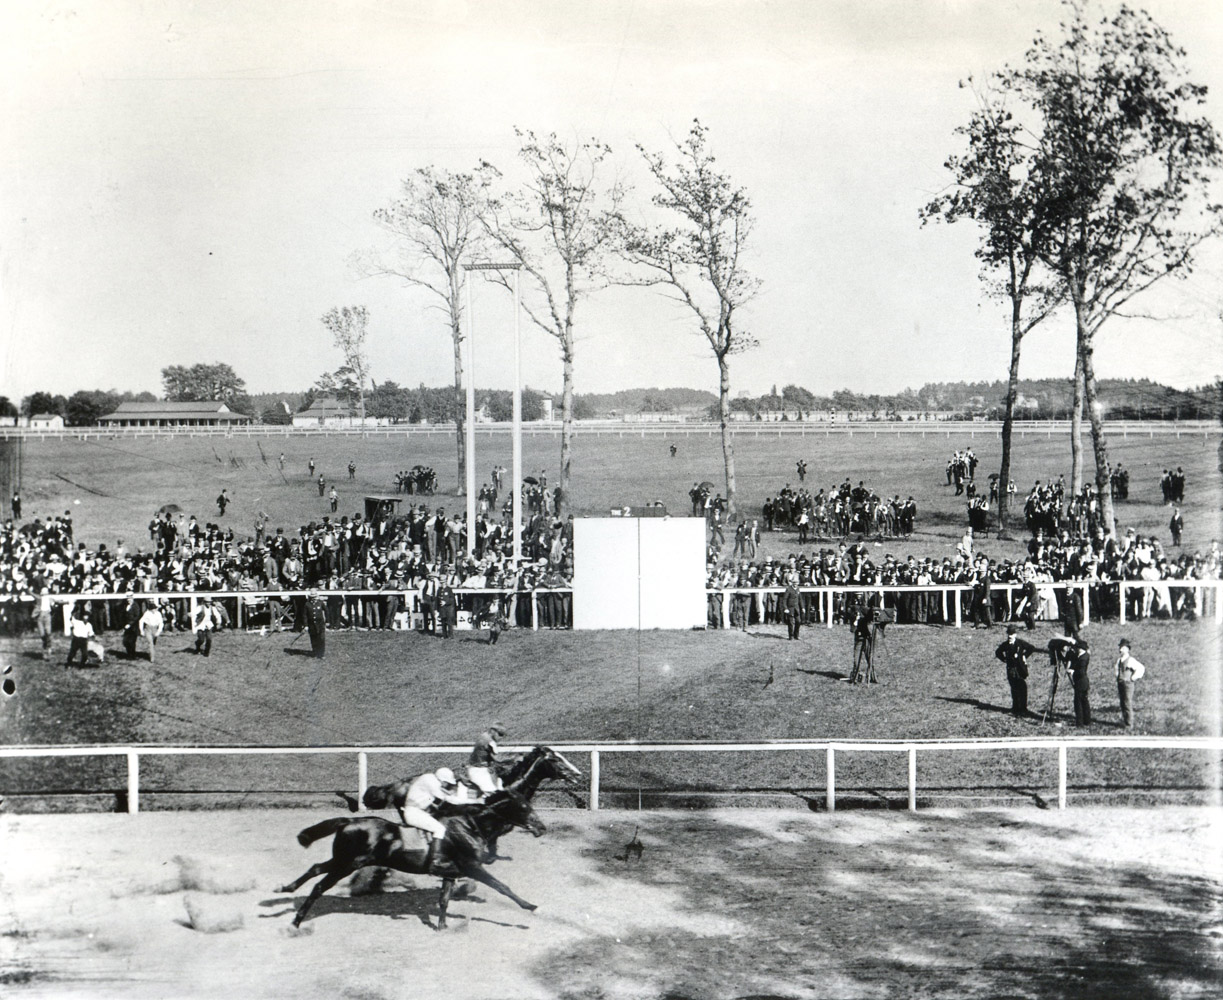 Salvator (Isaac Murphy up) defeating Tenny (Snapper Garrison up) in their famous match race at Sheepshead Bay in 1890 (Keeneland Library Hemment Collection/Museum Collection)